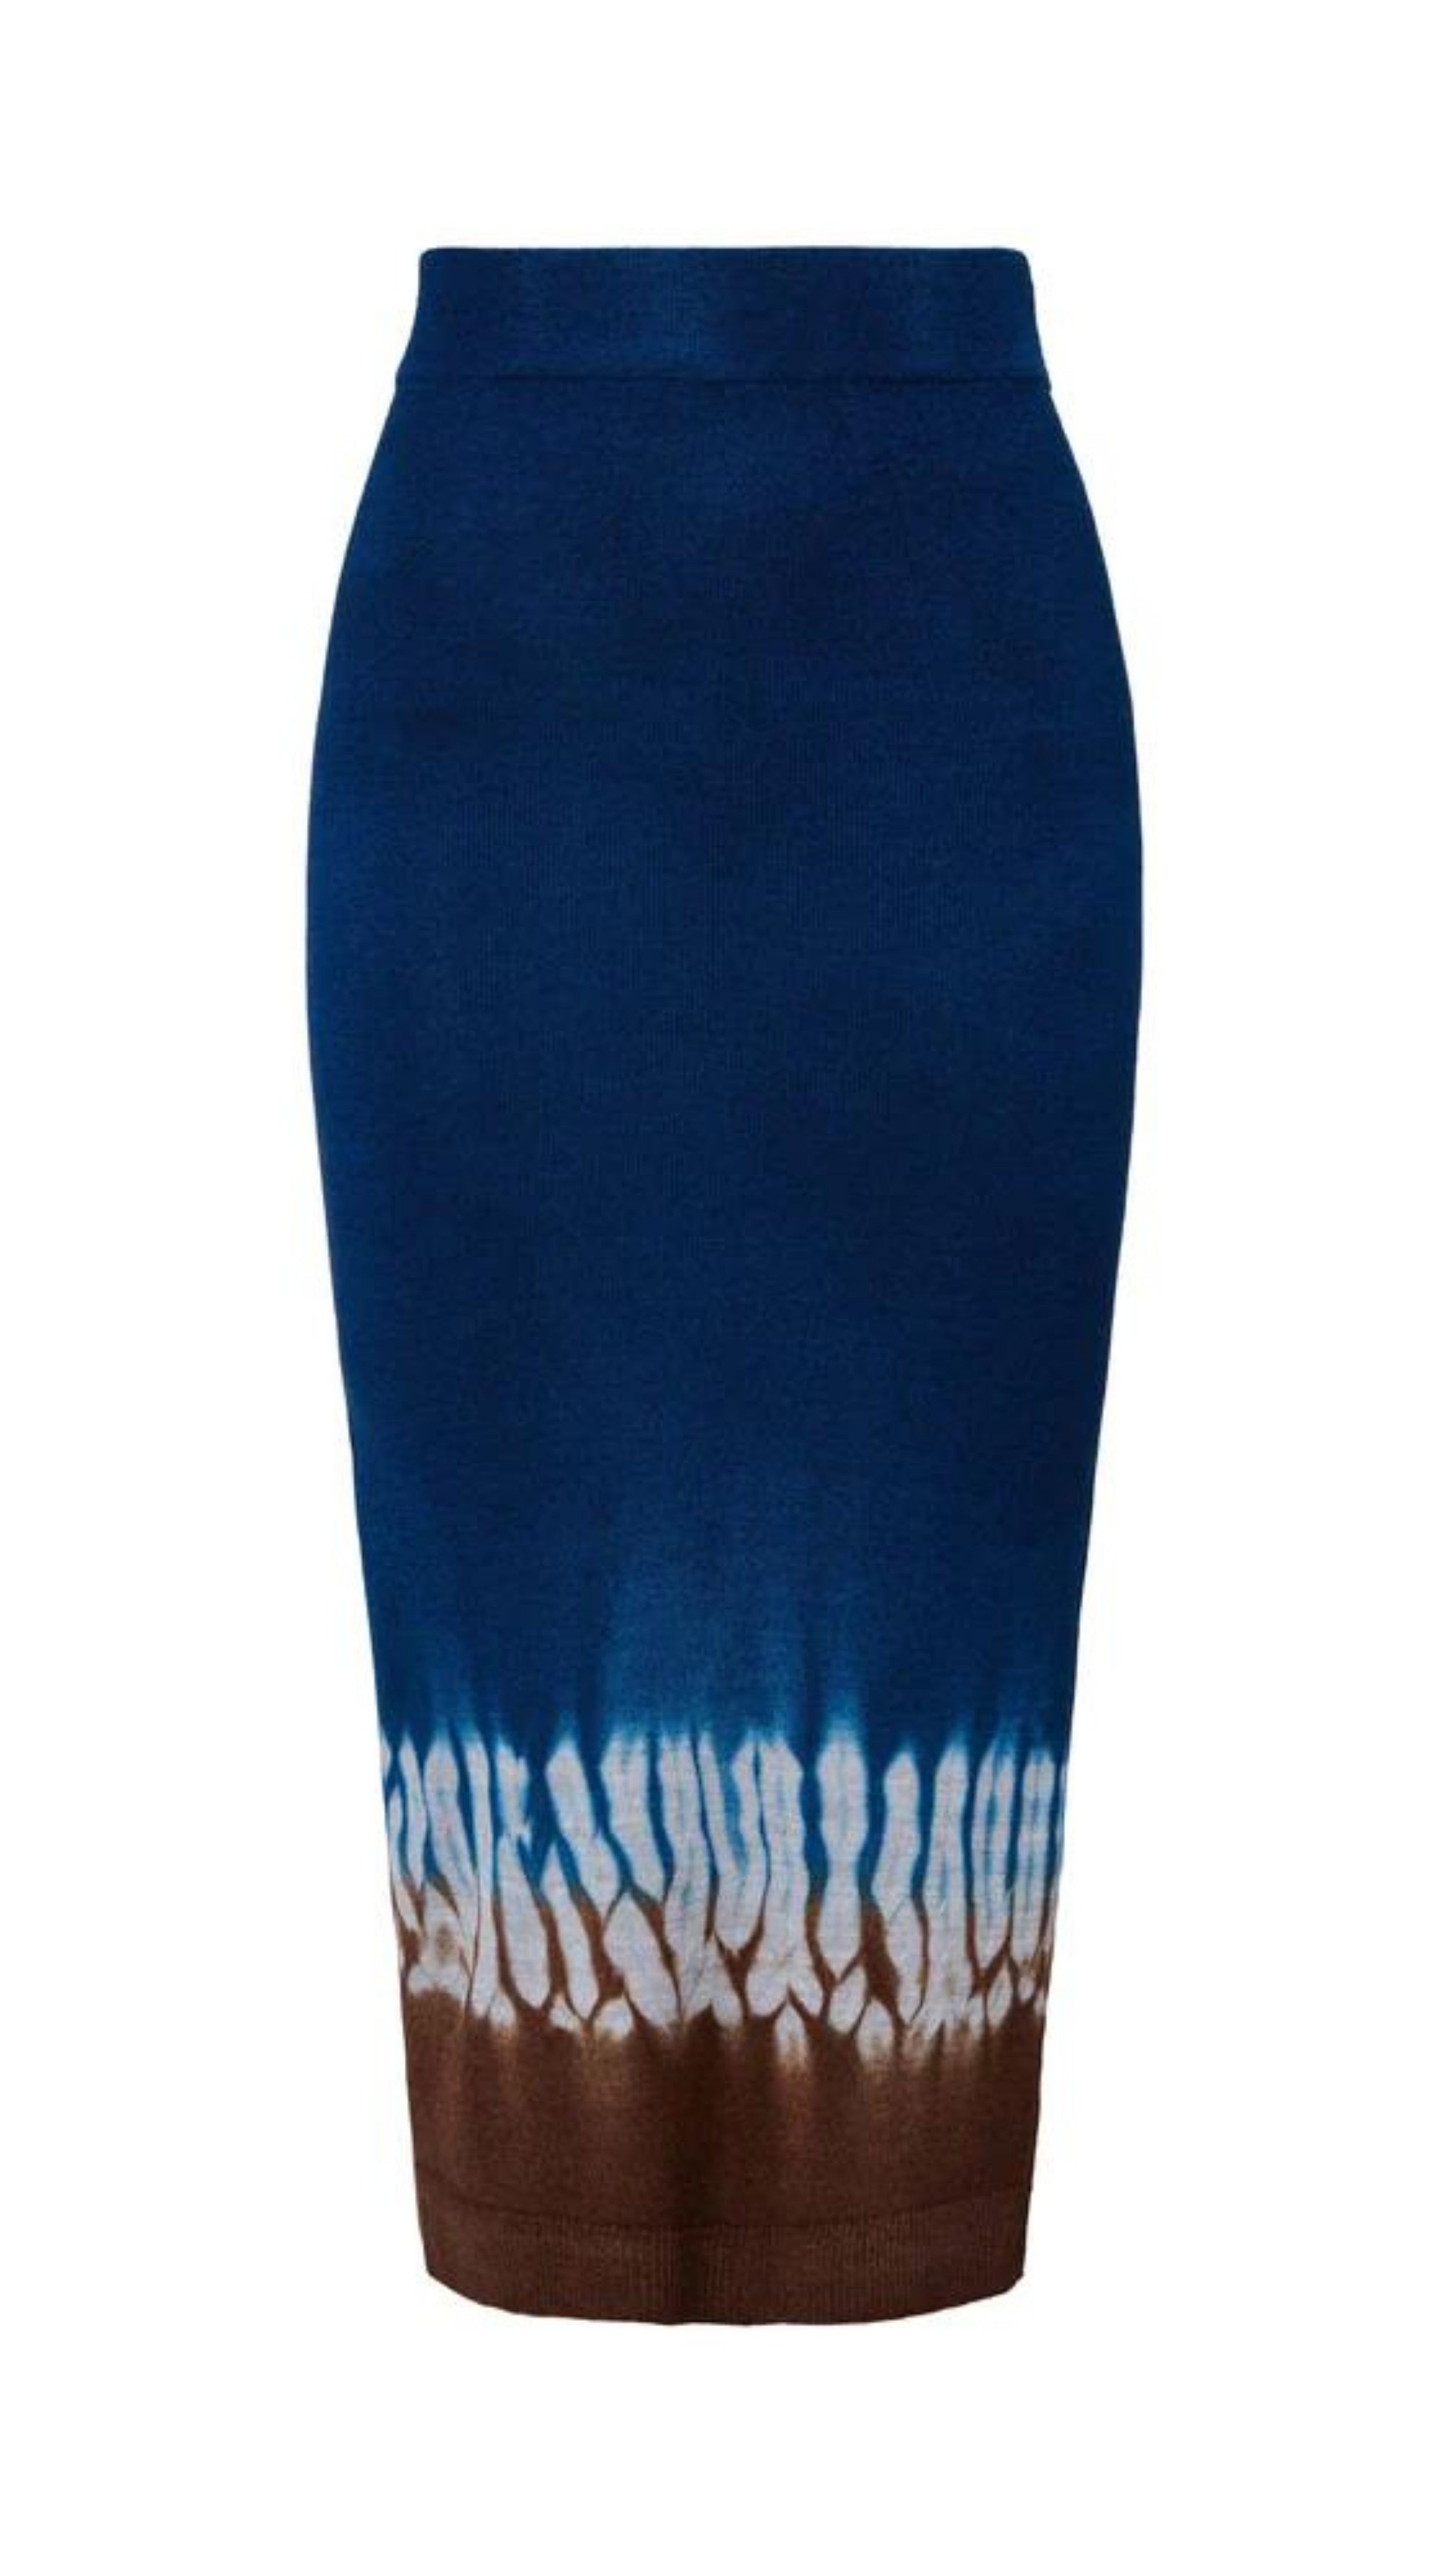 Altuzarra &#39;Morse&#39; skirt, featuring Altuzarra&#39;s iconic Shibori tie-dye technique in brown, white, and blue. Made from 100% Superfine Merino 130&#39;s wool, this high-rise pencil silhouette midi length skirt. Product photo shown flat